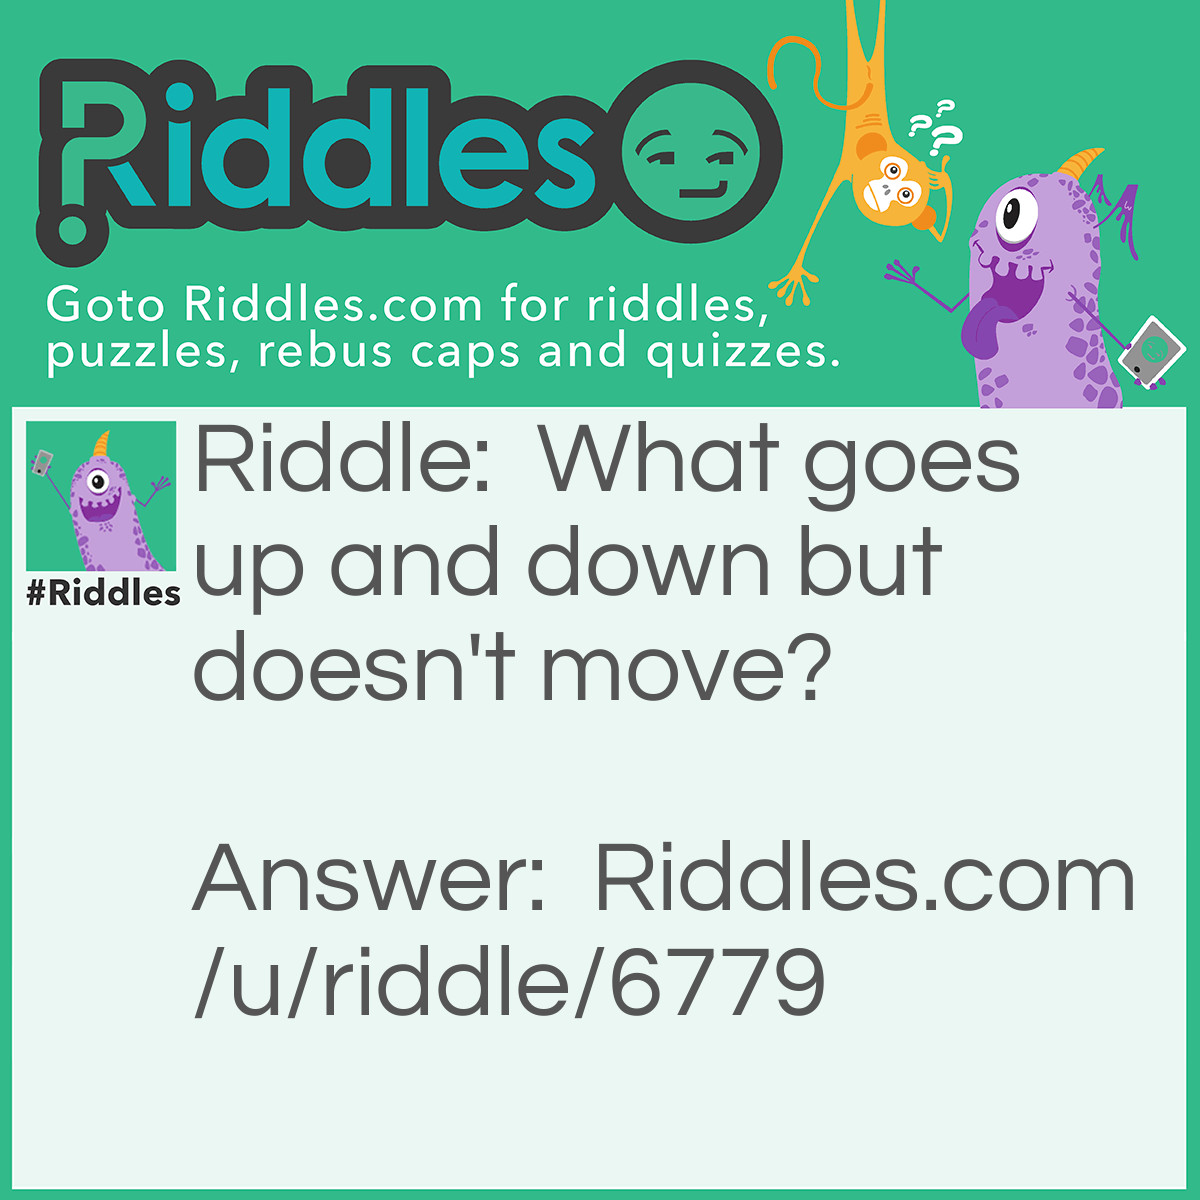 Riddle: What goes up and down but doesn't move? Answer: A staircase.